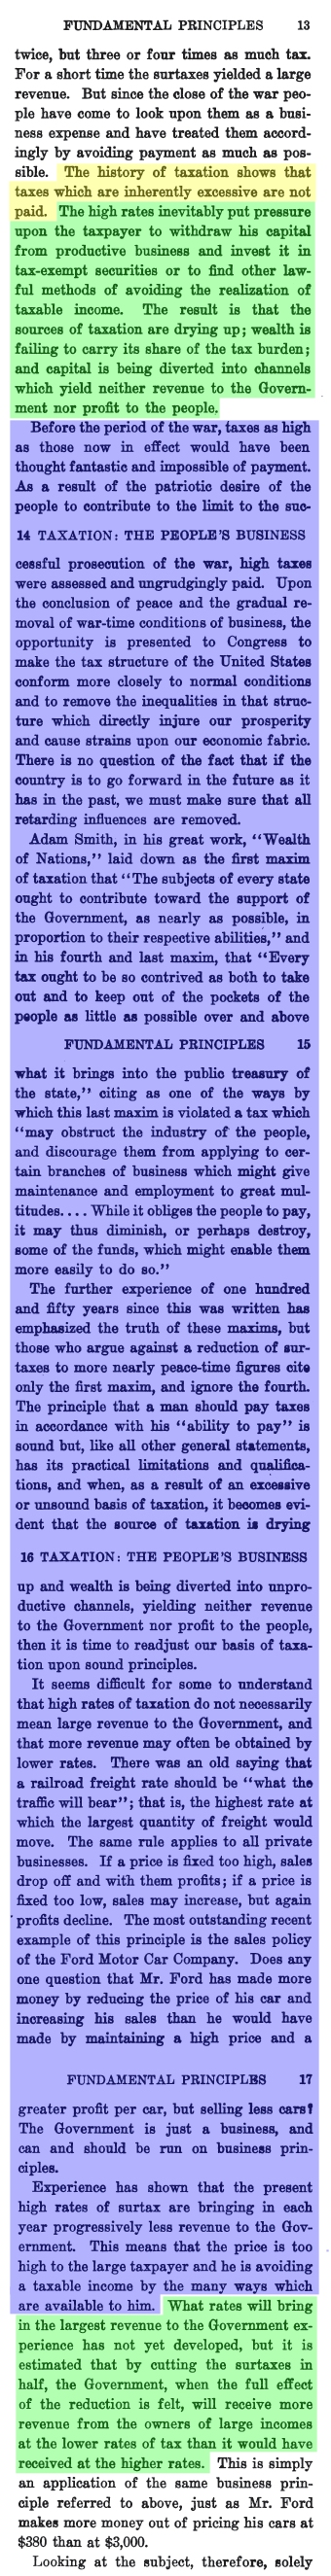 Taxation: The People's Business, Pages 13-17